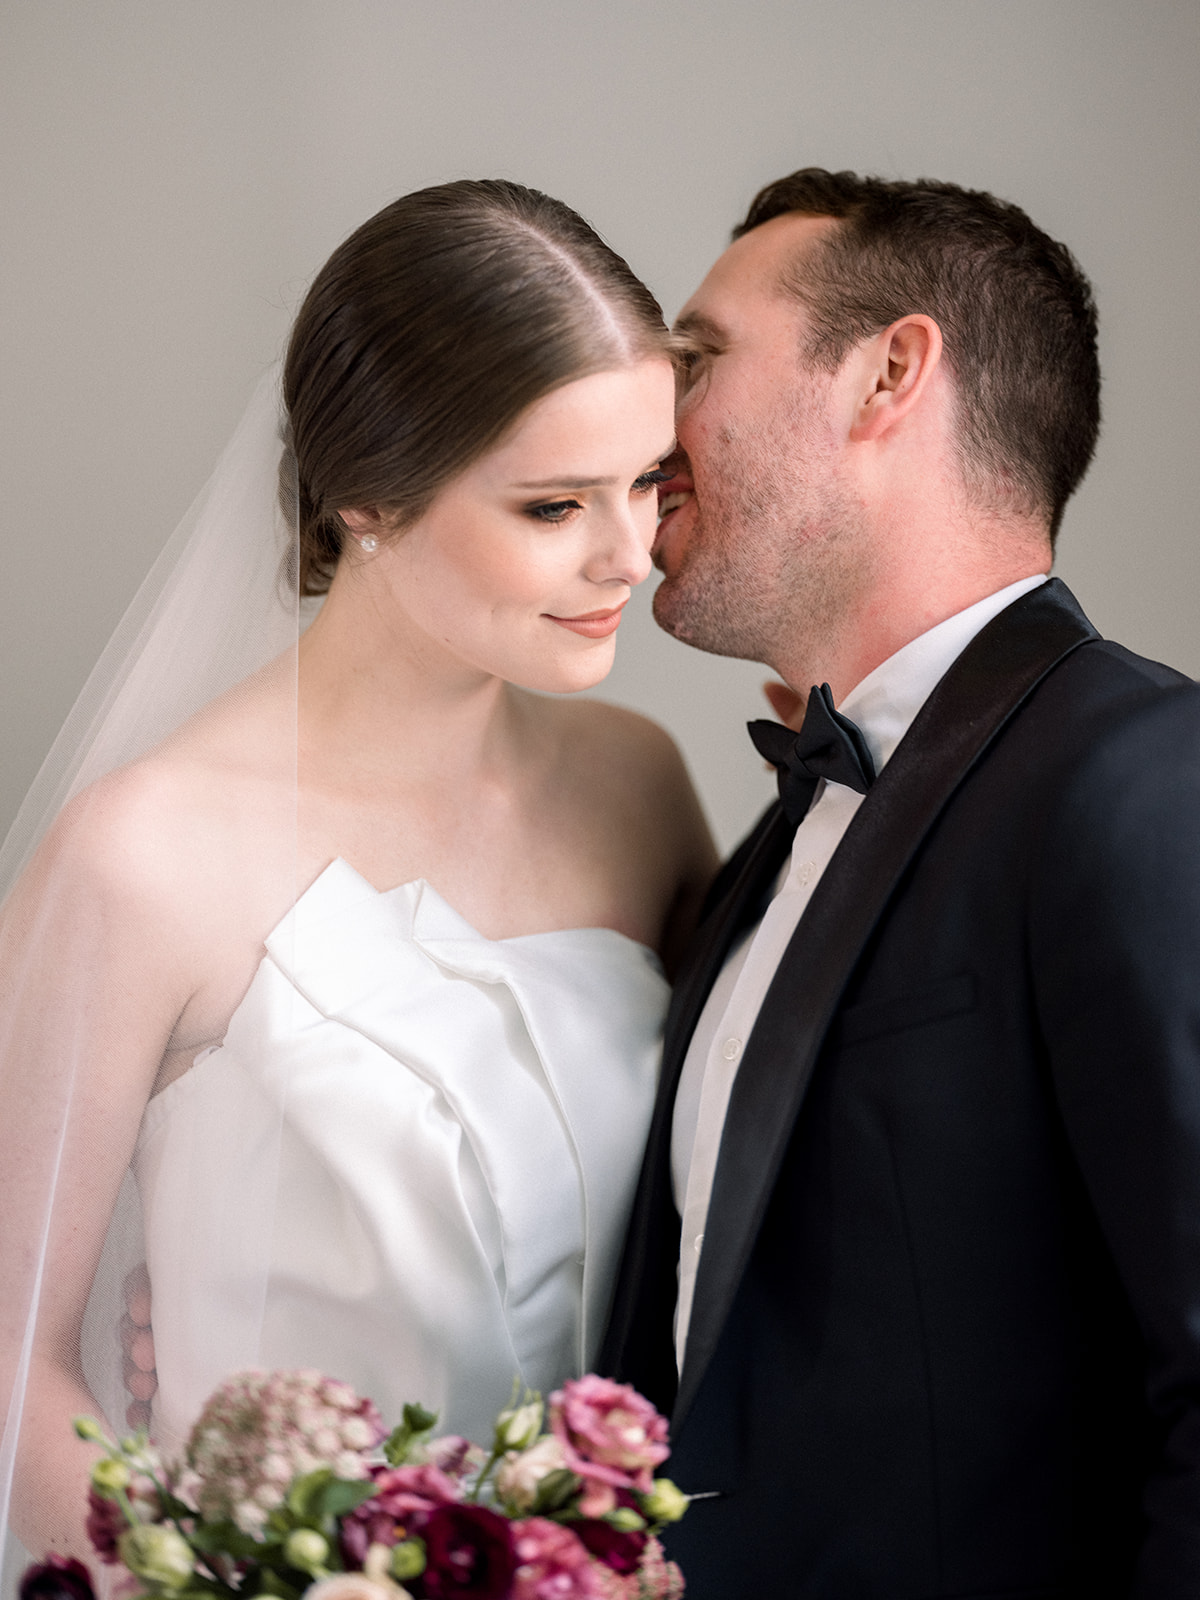 Intimate Matrimony in the Heart of a Pandemic | Luxury Wedding Photographer Halifax Canada | Best Photographers Halifax | Halifax Club Wedding | Nova Scotia Wedding